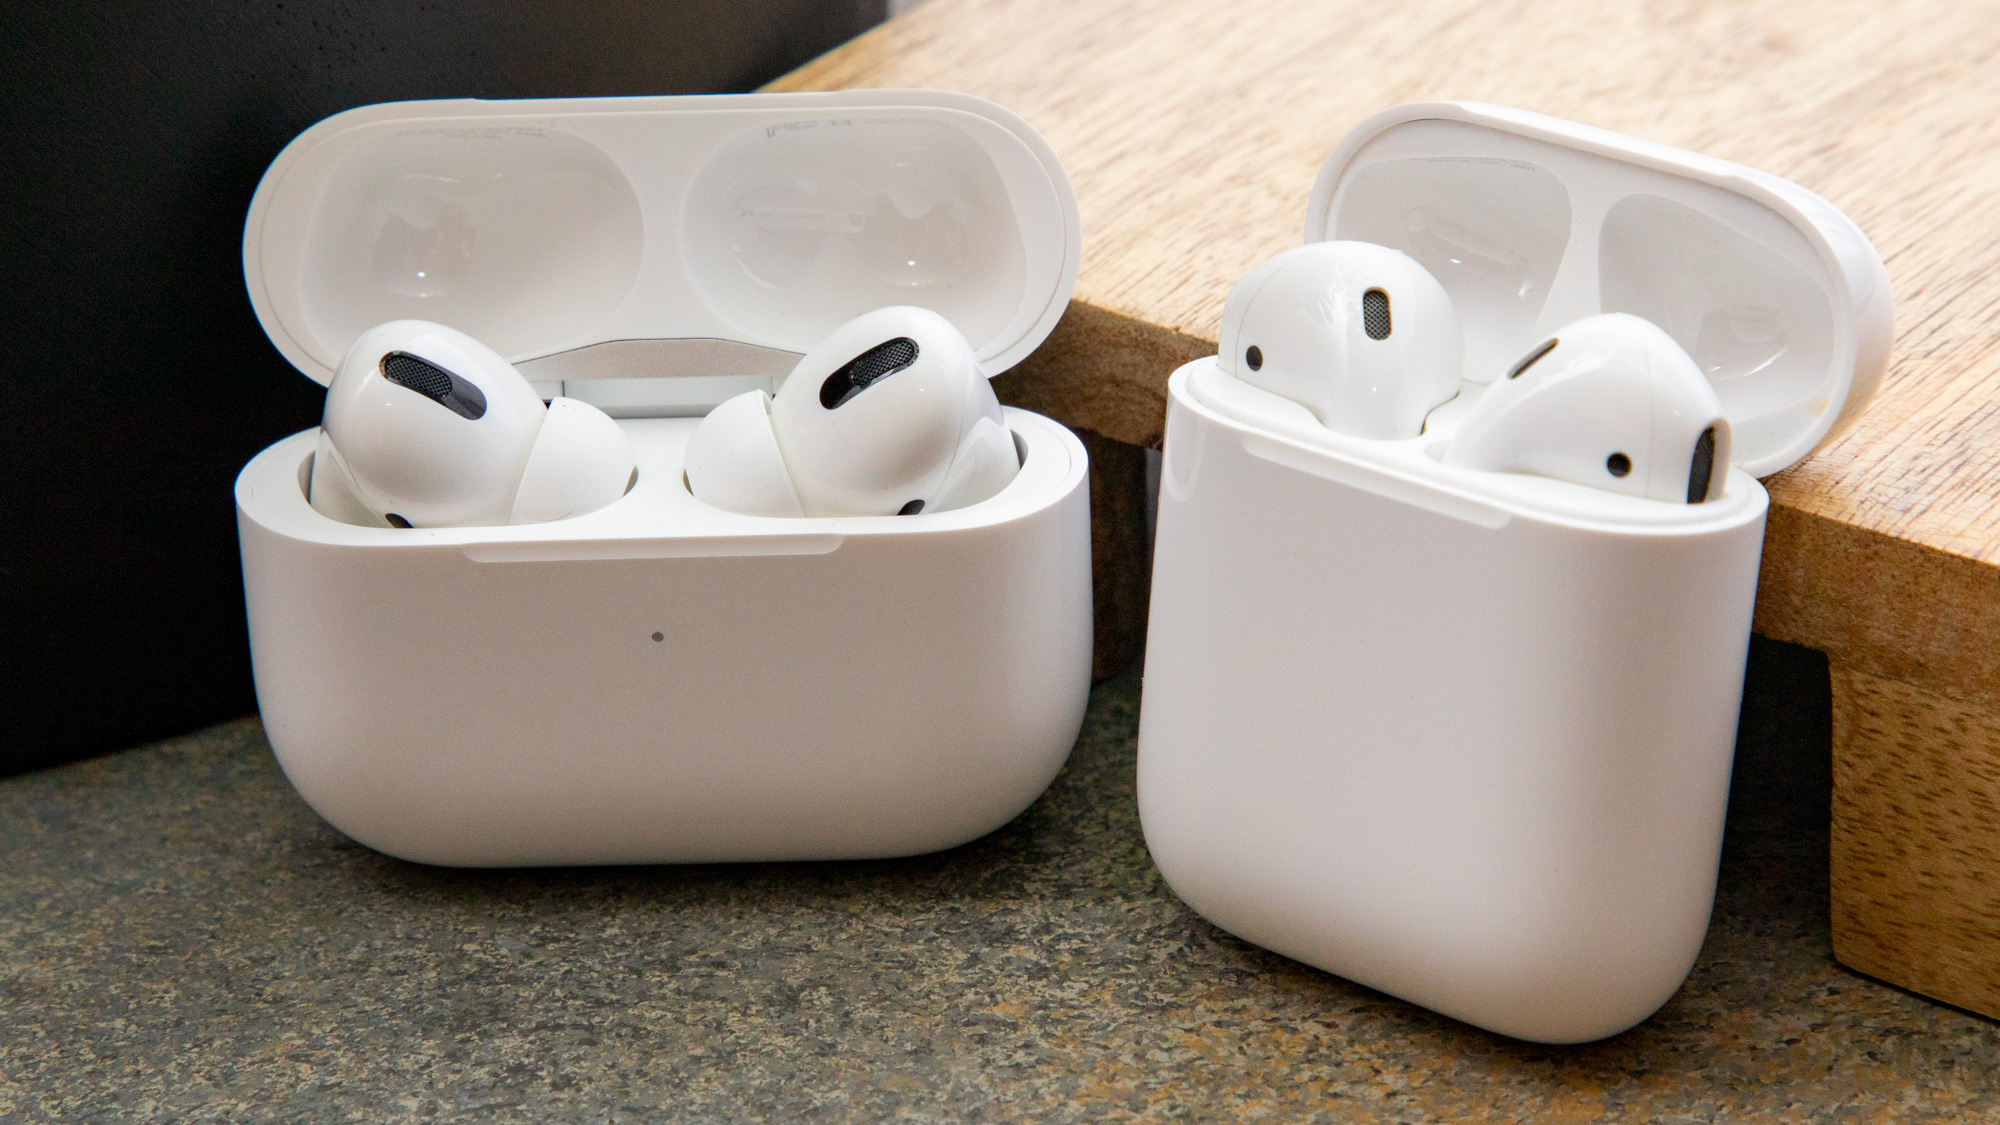 The AirPods Pro (left) next to the 2019 AirPods